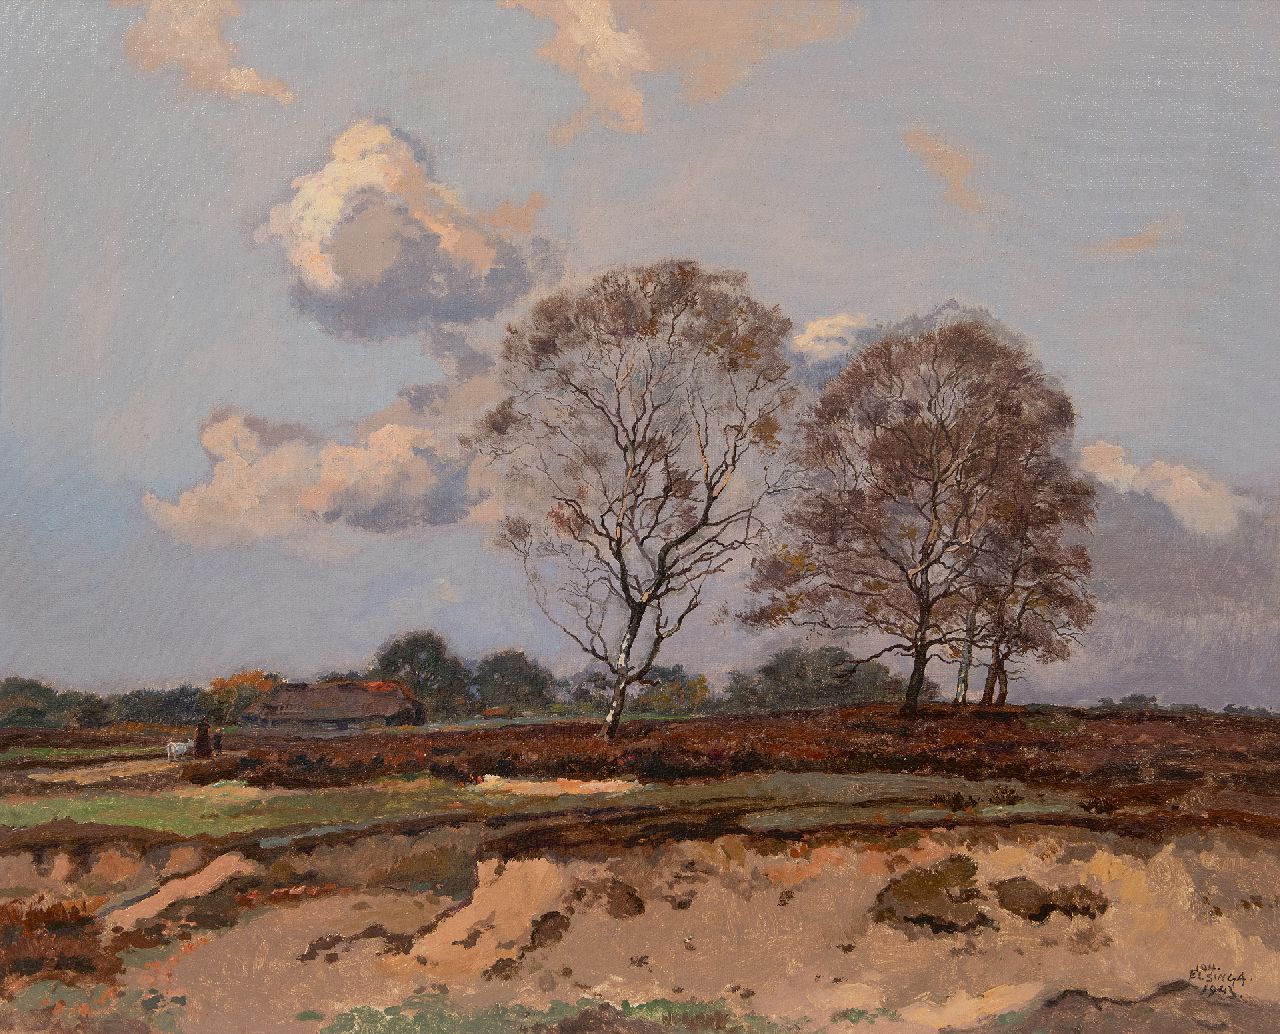 Joh Elsinga | Veluwe landscape near Ede, Nieuw Reemst., oil on canvas, 46.4 x 56.3 cm, signed l.r. and dated 1943